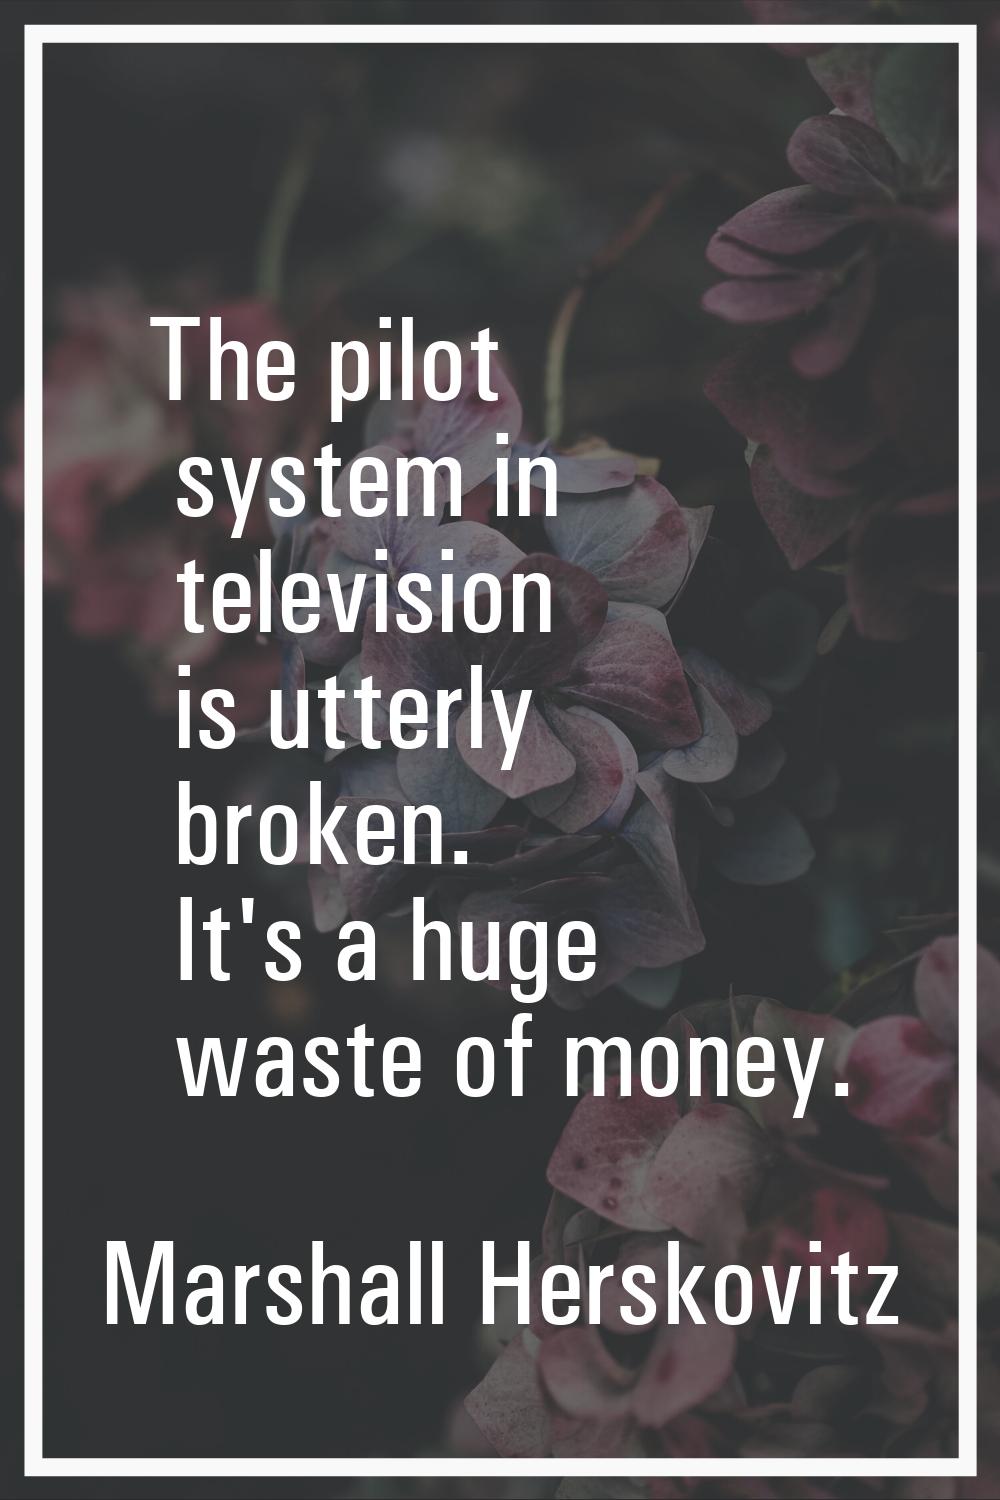 The pilot system in television is utterly broken. It's a huge waste of money.